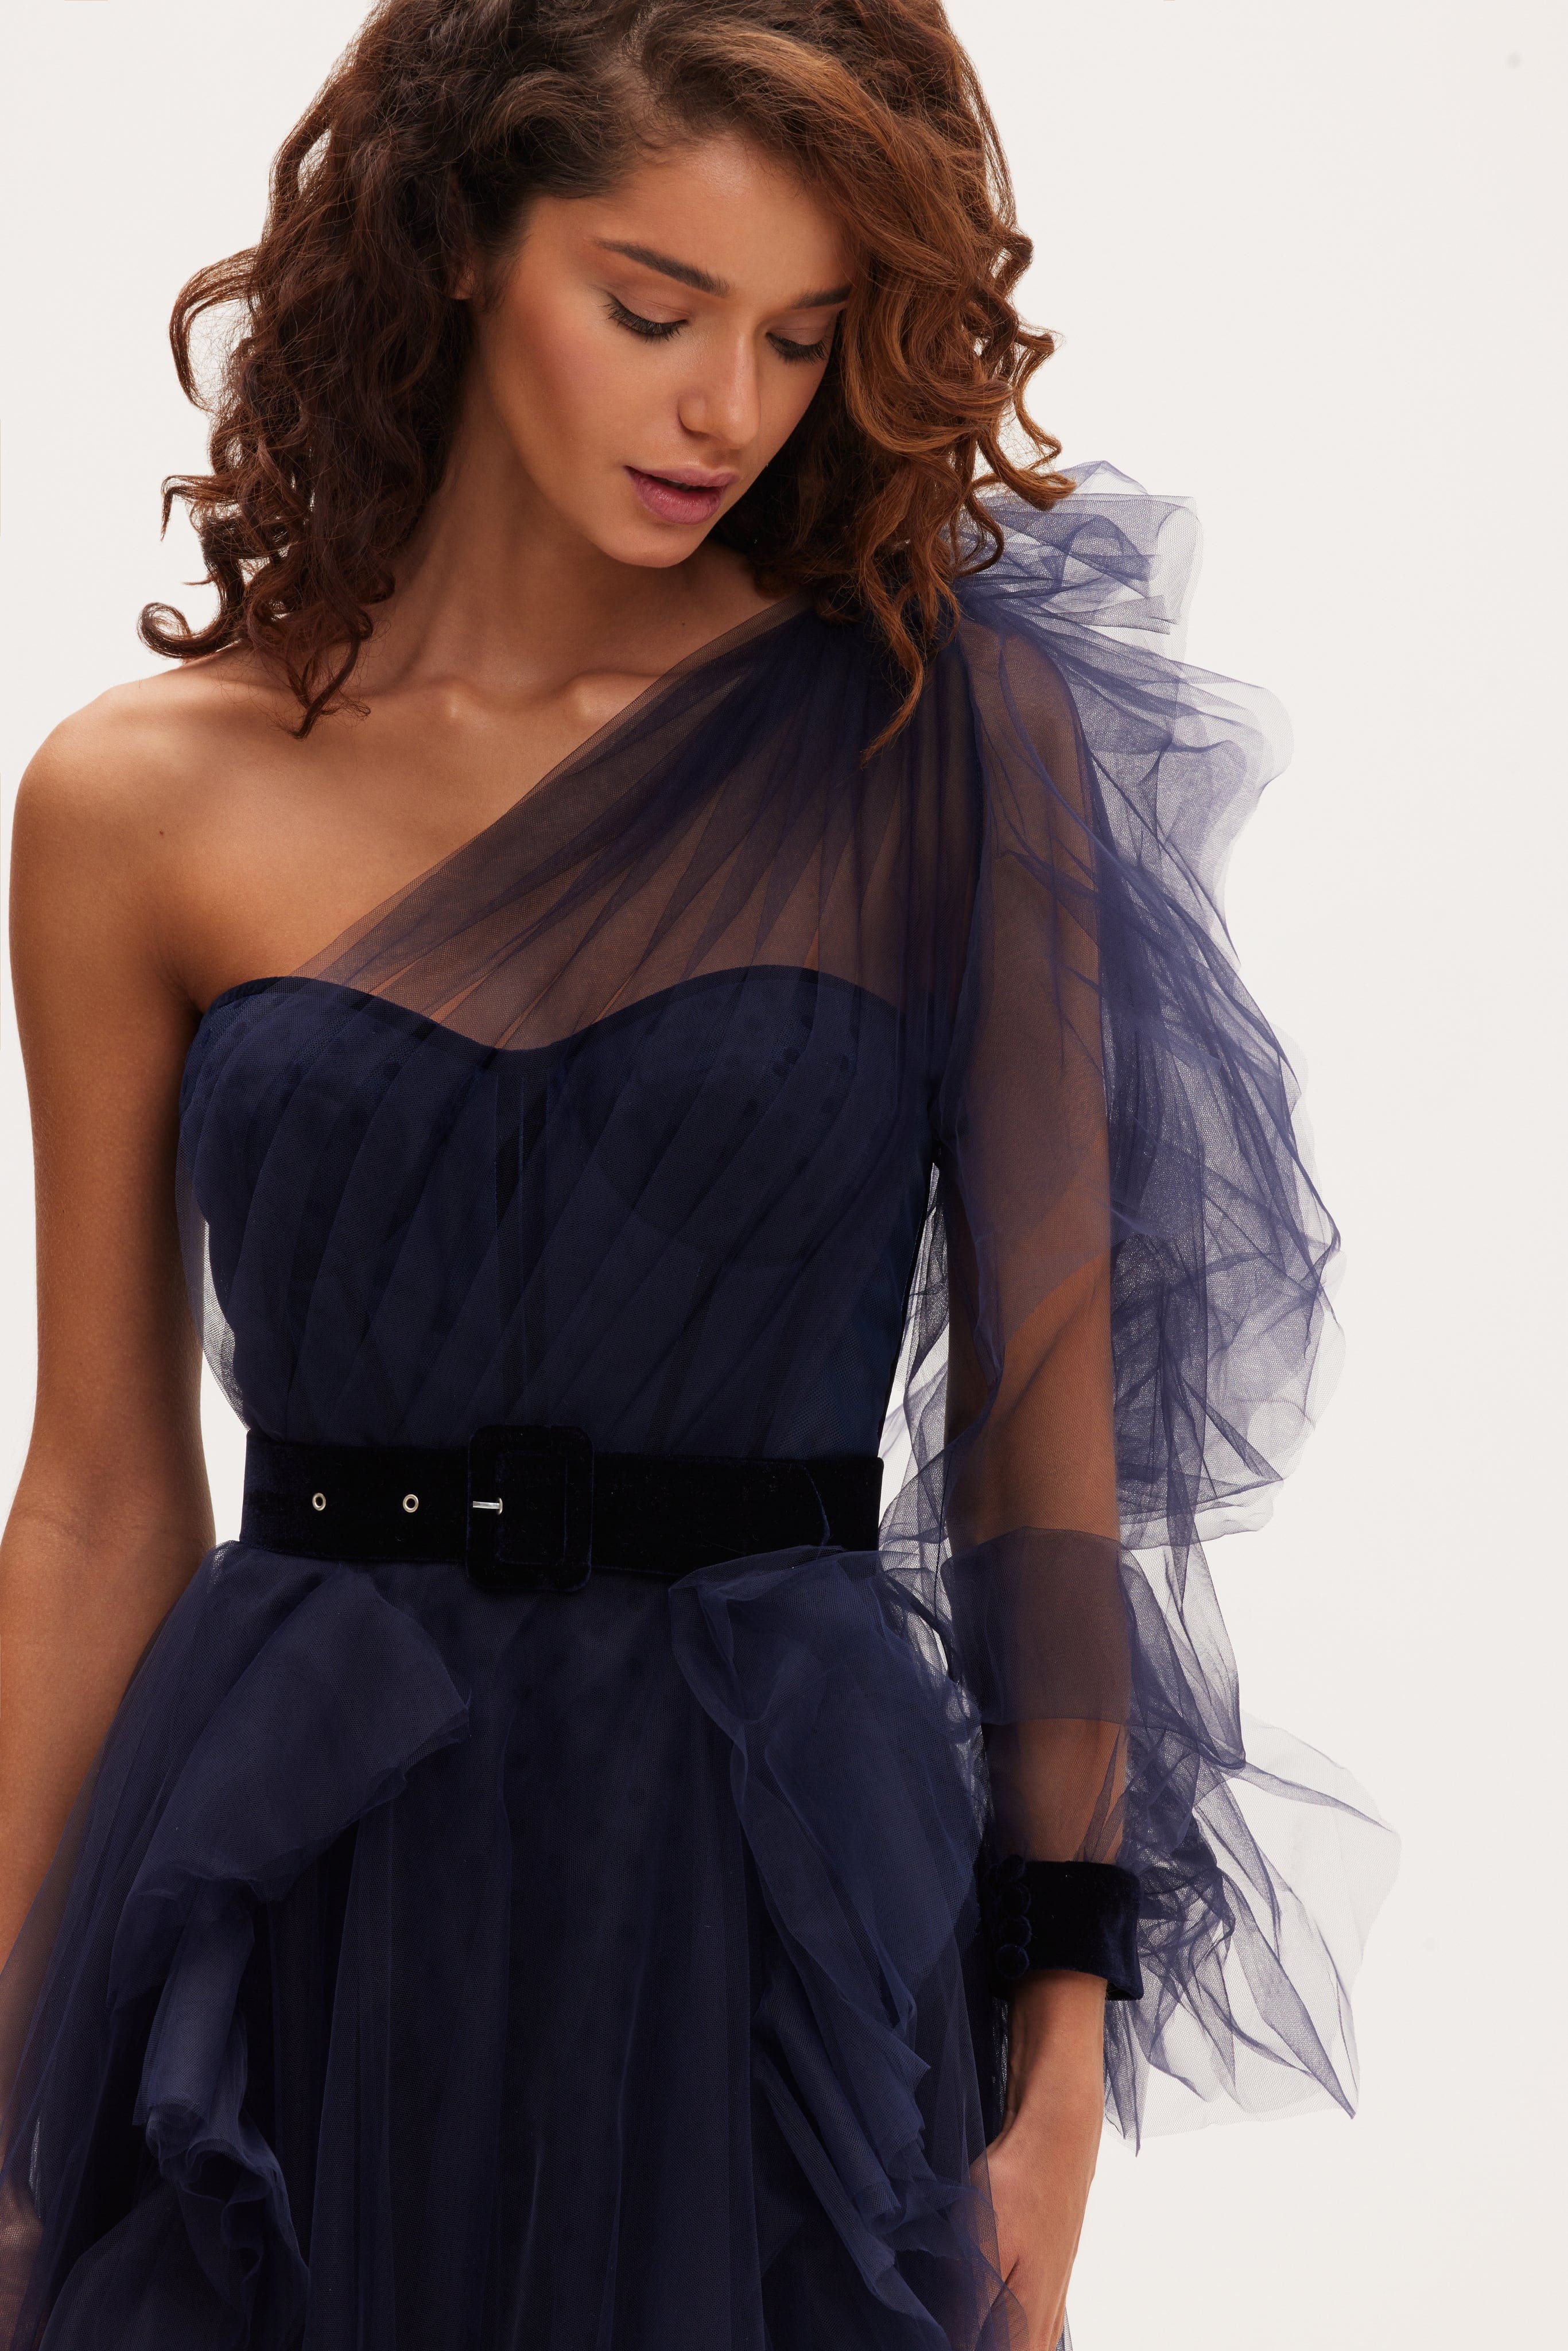 Royal Navy tulle gown with detachable sleeve